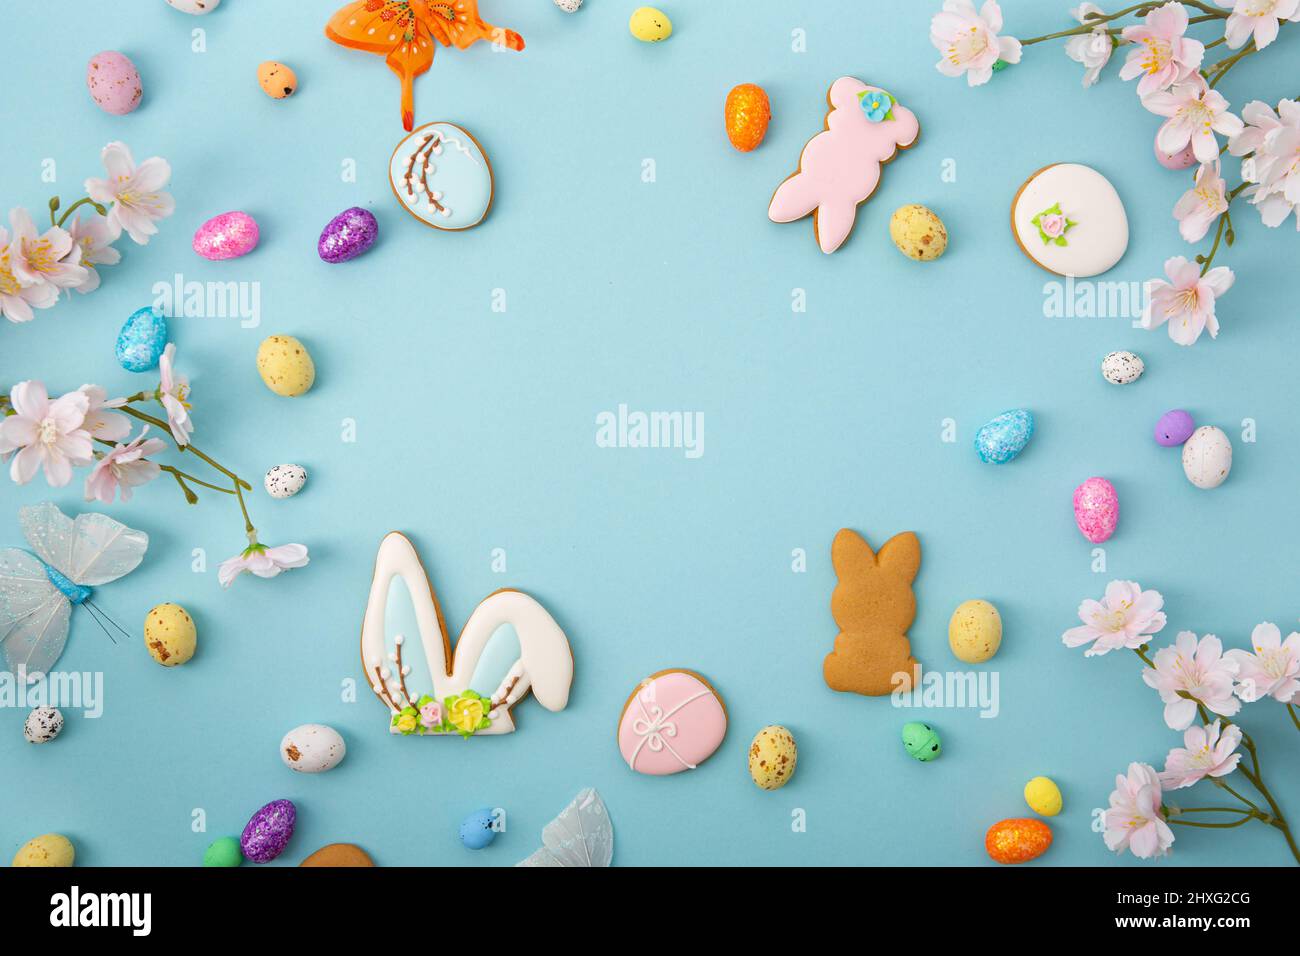 Blue Easter holiday background with eggs flowers cookies bunny Stock Photo